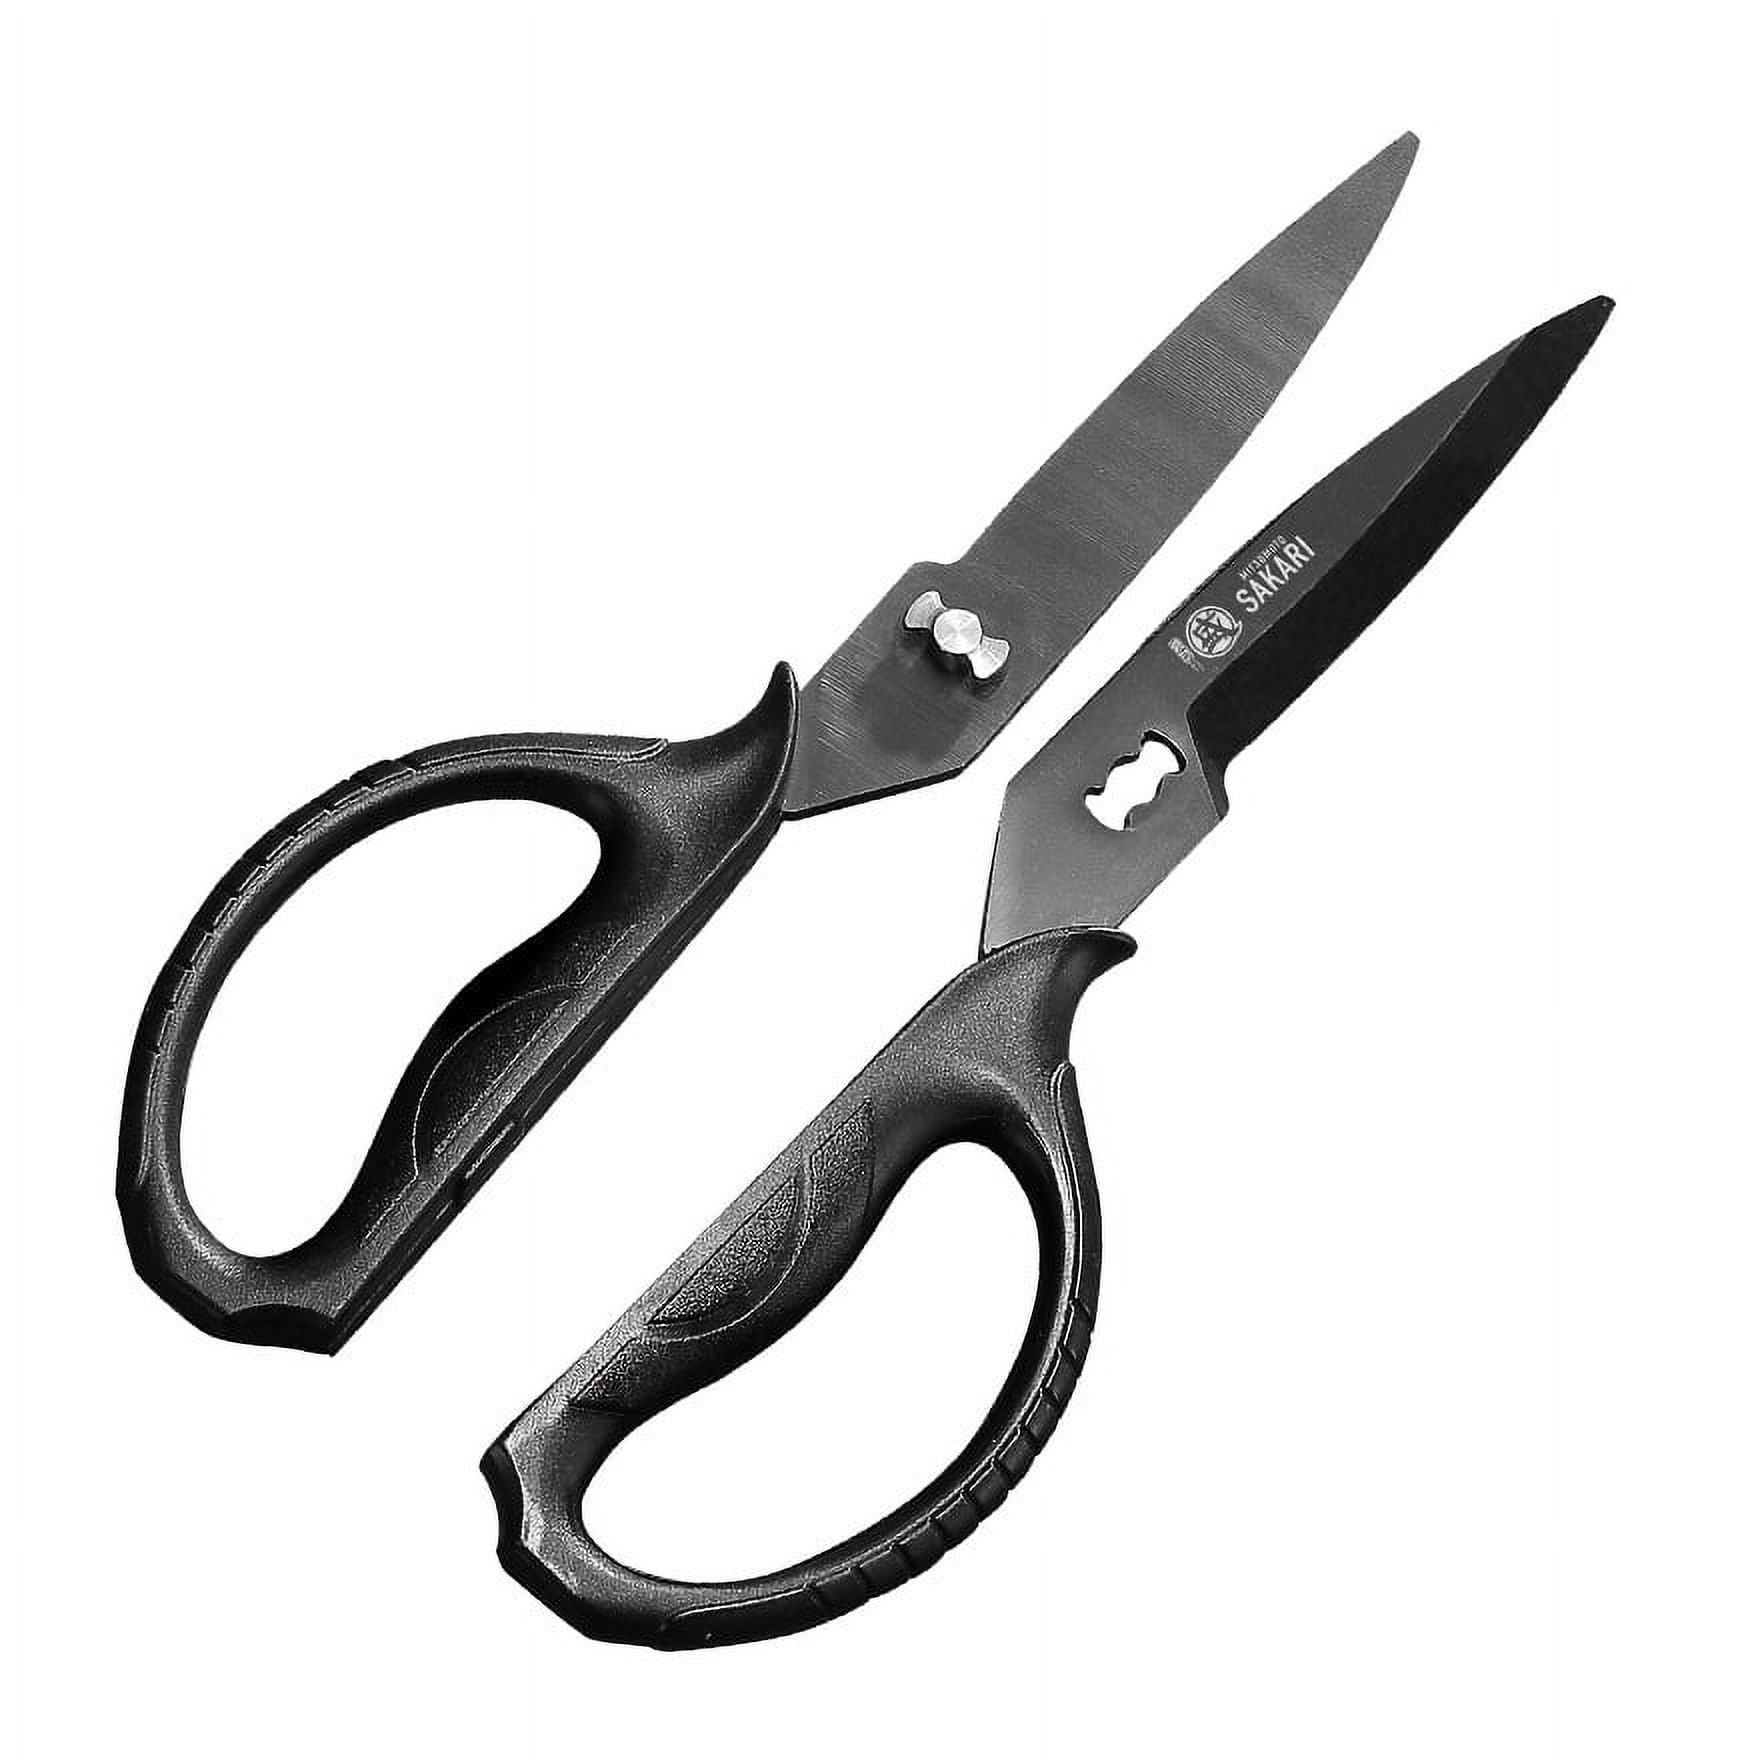 Wusthof 5558-1 Come-A-Part Kitchen Shears